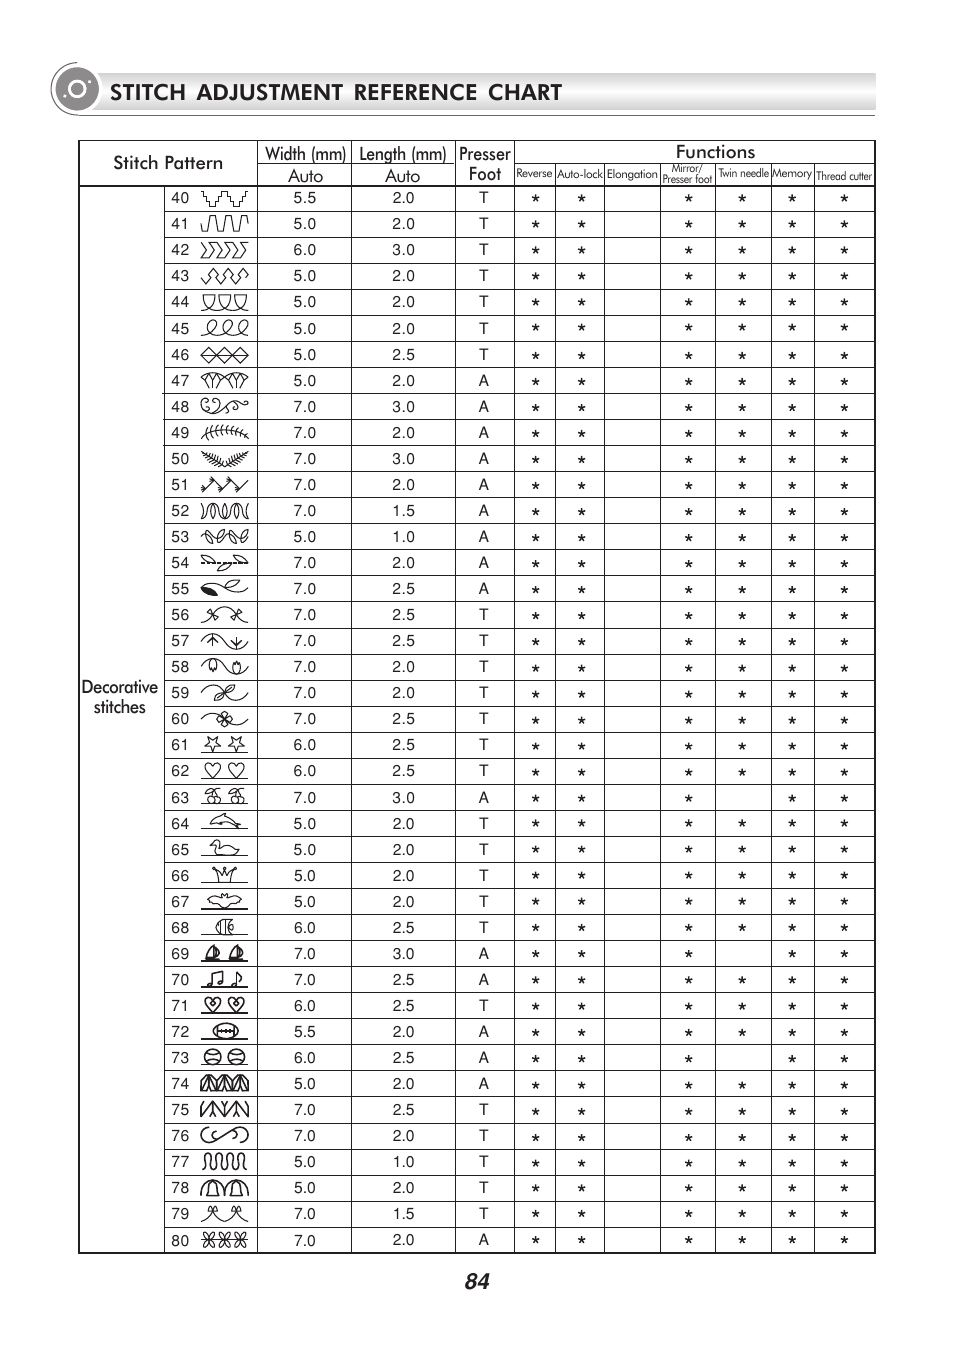 84 stitch adjustment reference chart | SINGER 9340 SIGNATURE User Manual | Page 89 / 91